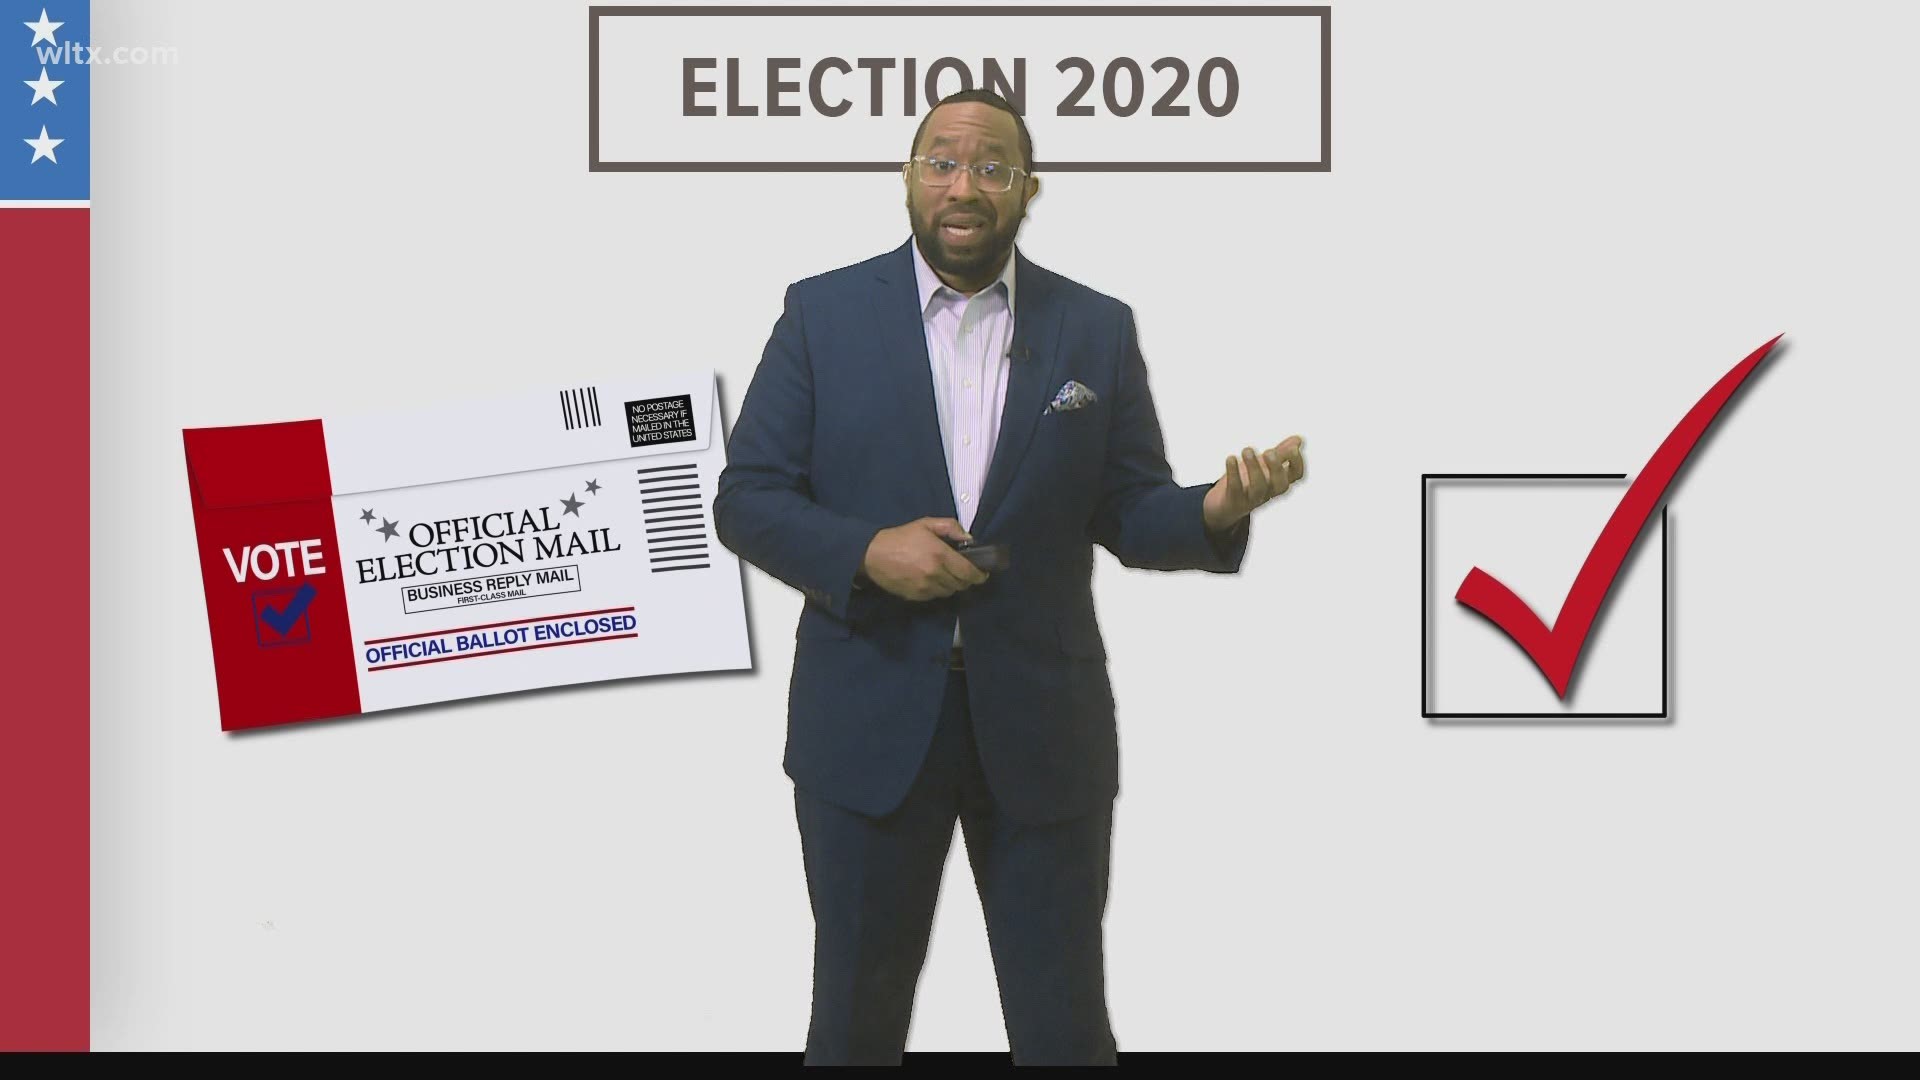 Voting absentee has become a popular option for voters due to the pandemic, but if you've never voted absentee, you might be wondering what happens to your ballot.